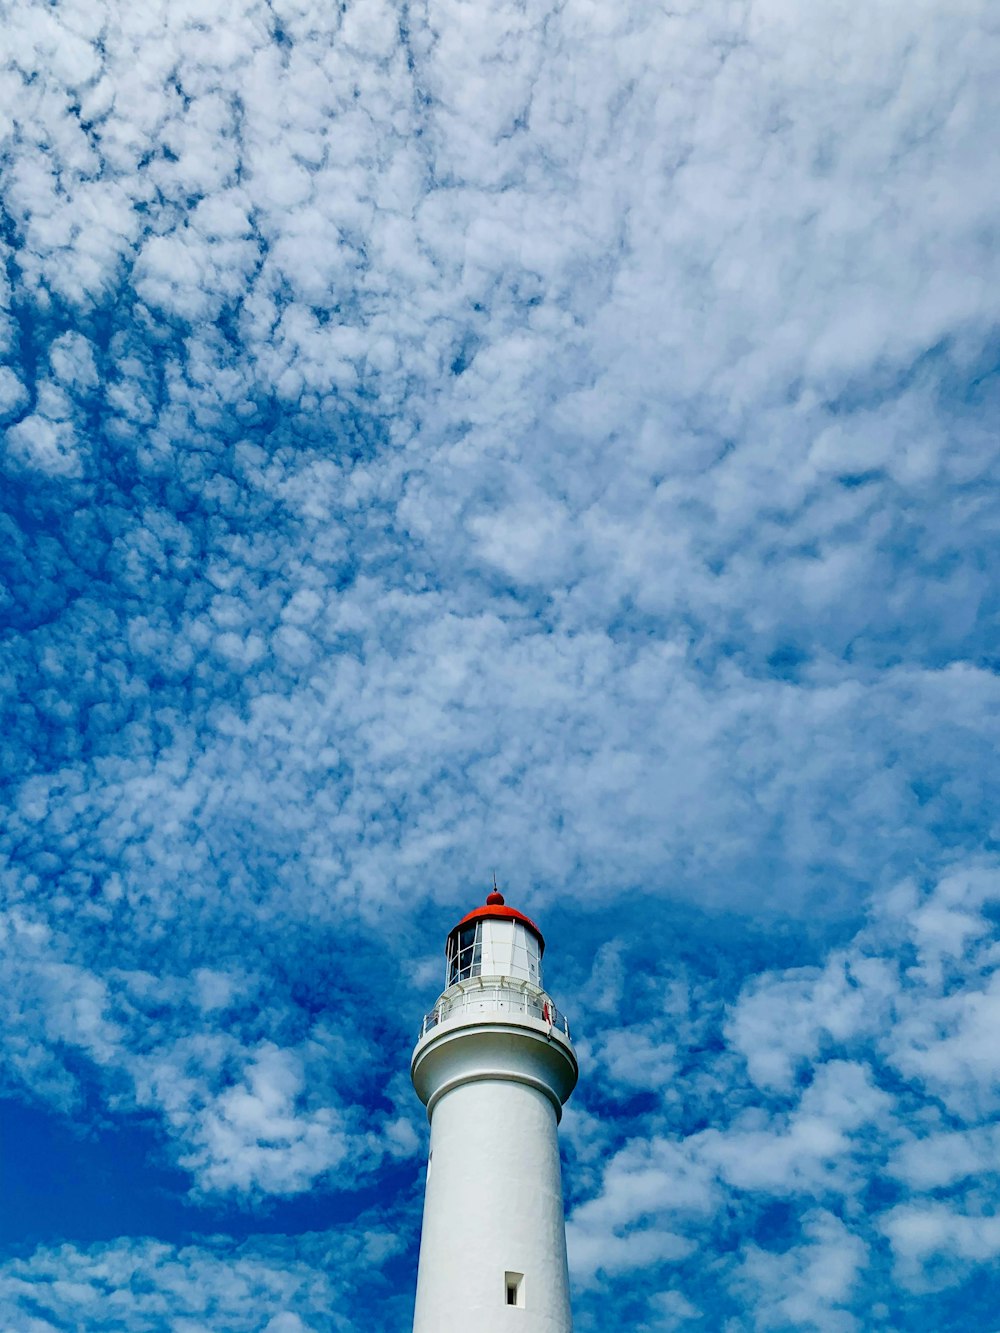 white and red lighthouse under blue sky and white clouds during daytime